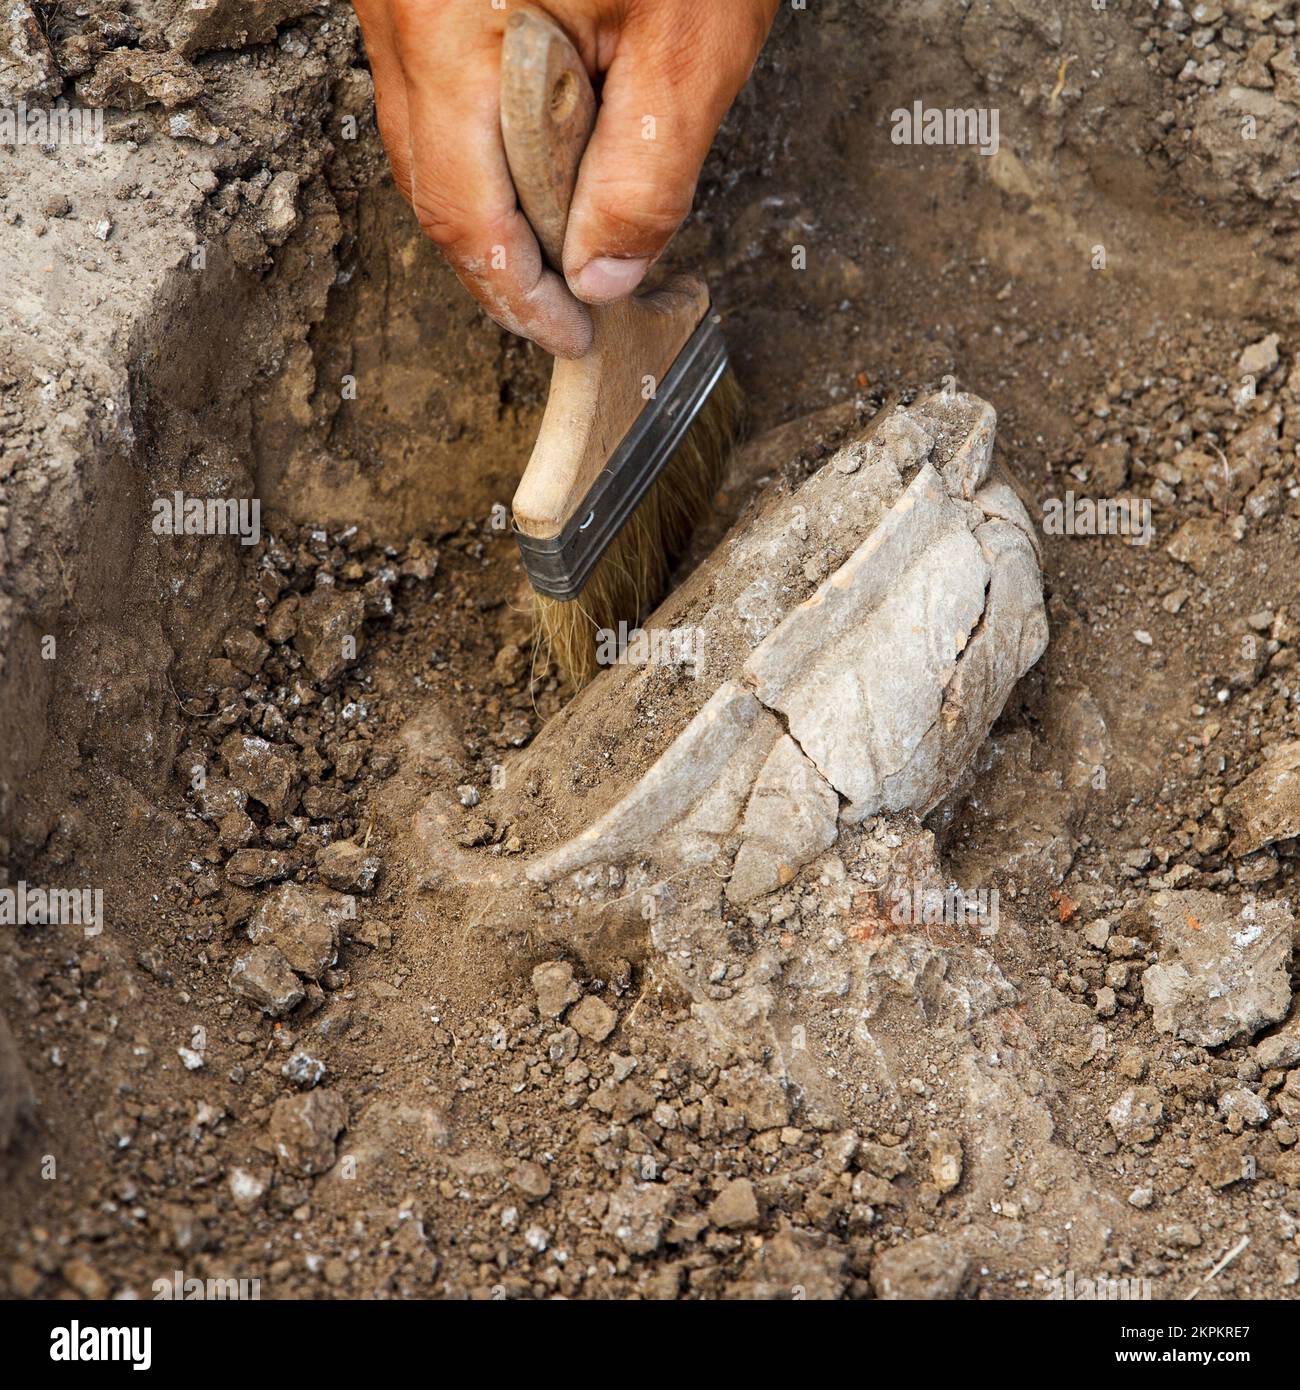 Professional Archaeological excavations, archaeologists work, dig up an ancient clay artifact with special tools in soil Stock Photo